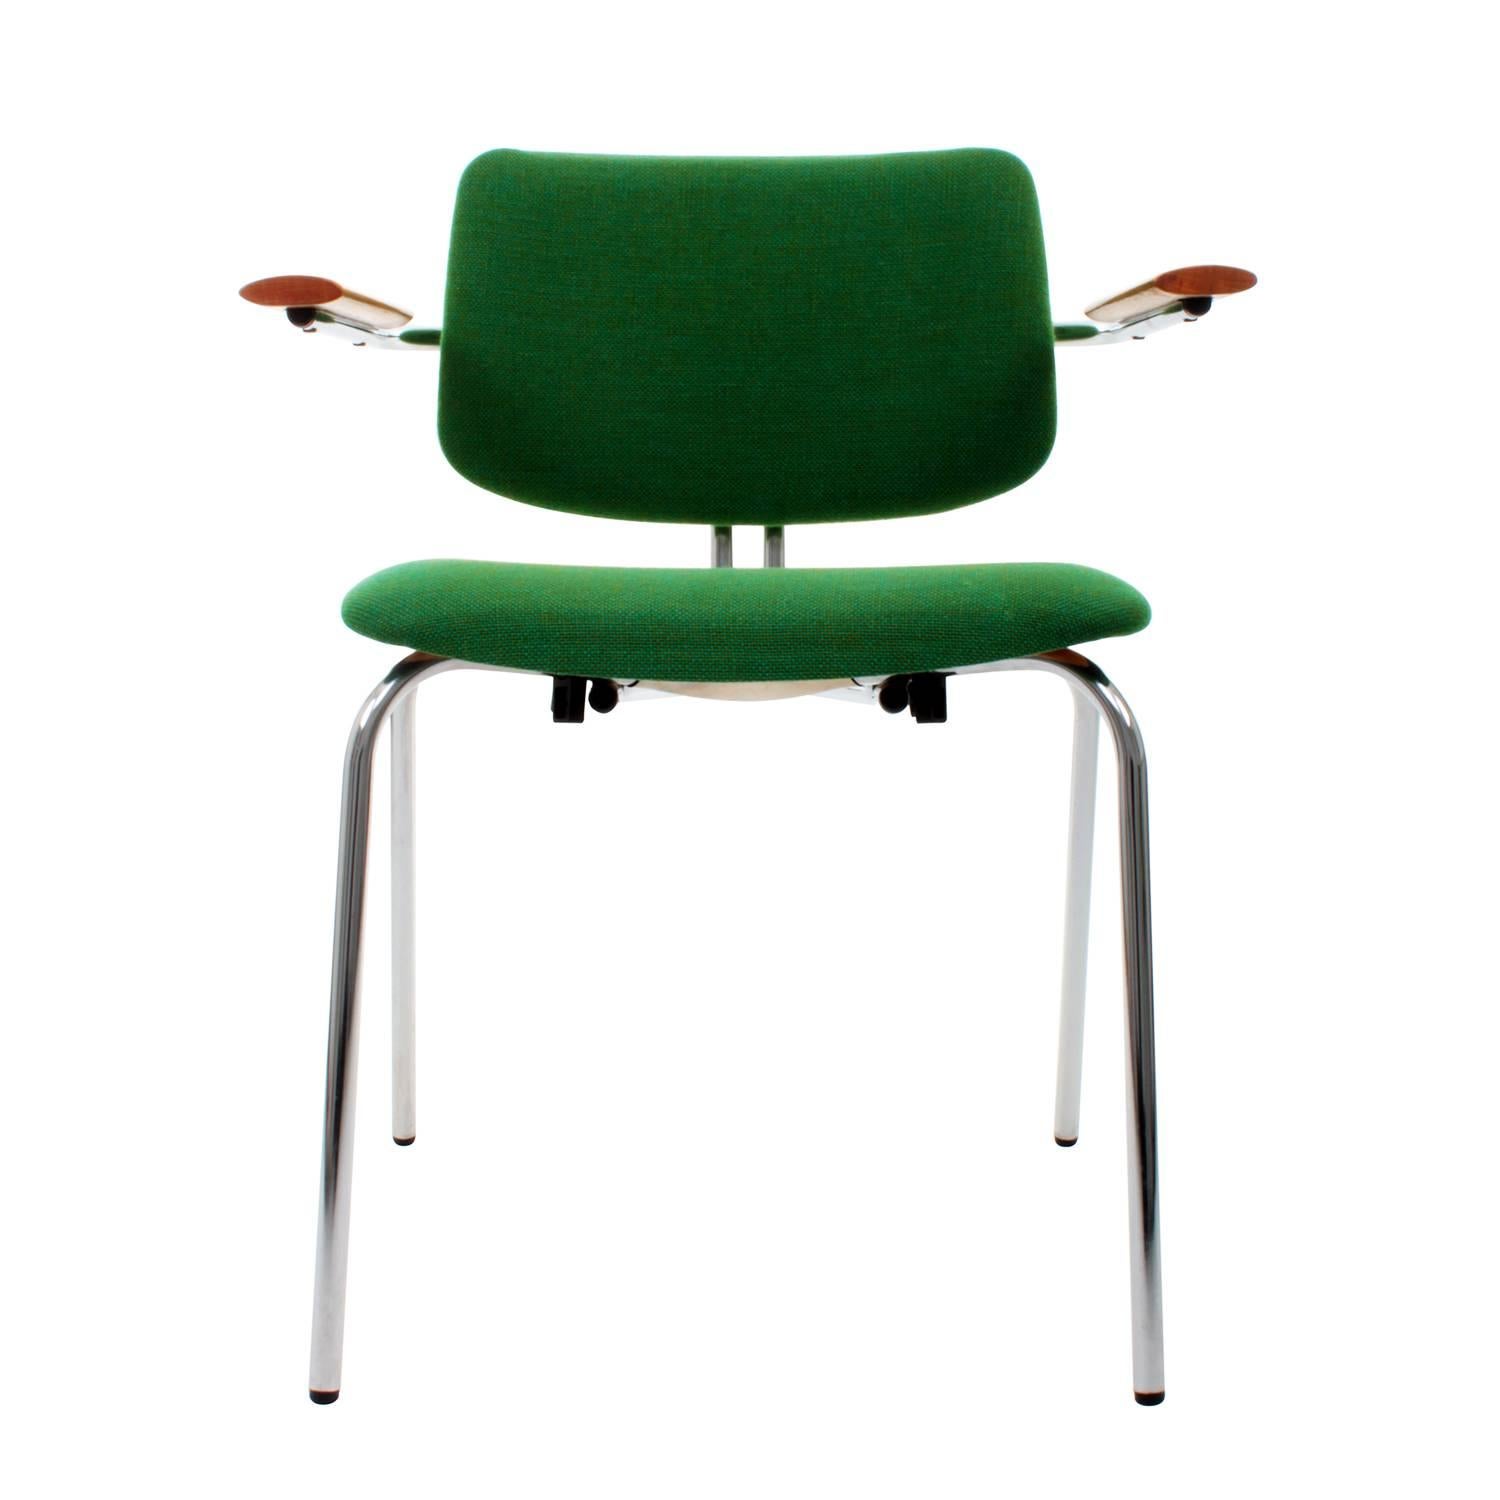 Chair by Duba Møbelindustri in the 1980s, vintage dining chair with original forest-green wool upholstery, beech armrest and chromed legs, in very good vintage condition.

A very attractive dining chair, shaped a little different to common slim and